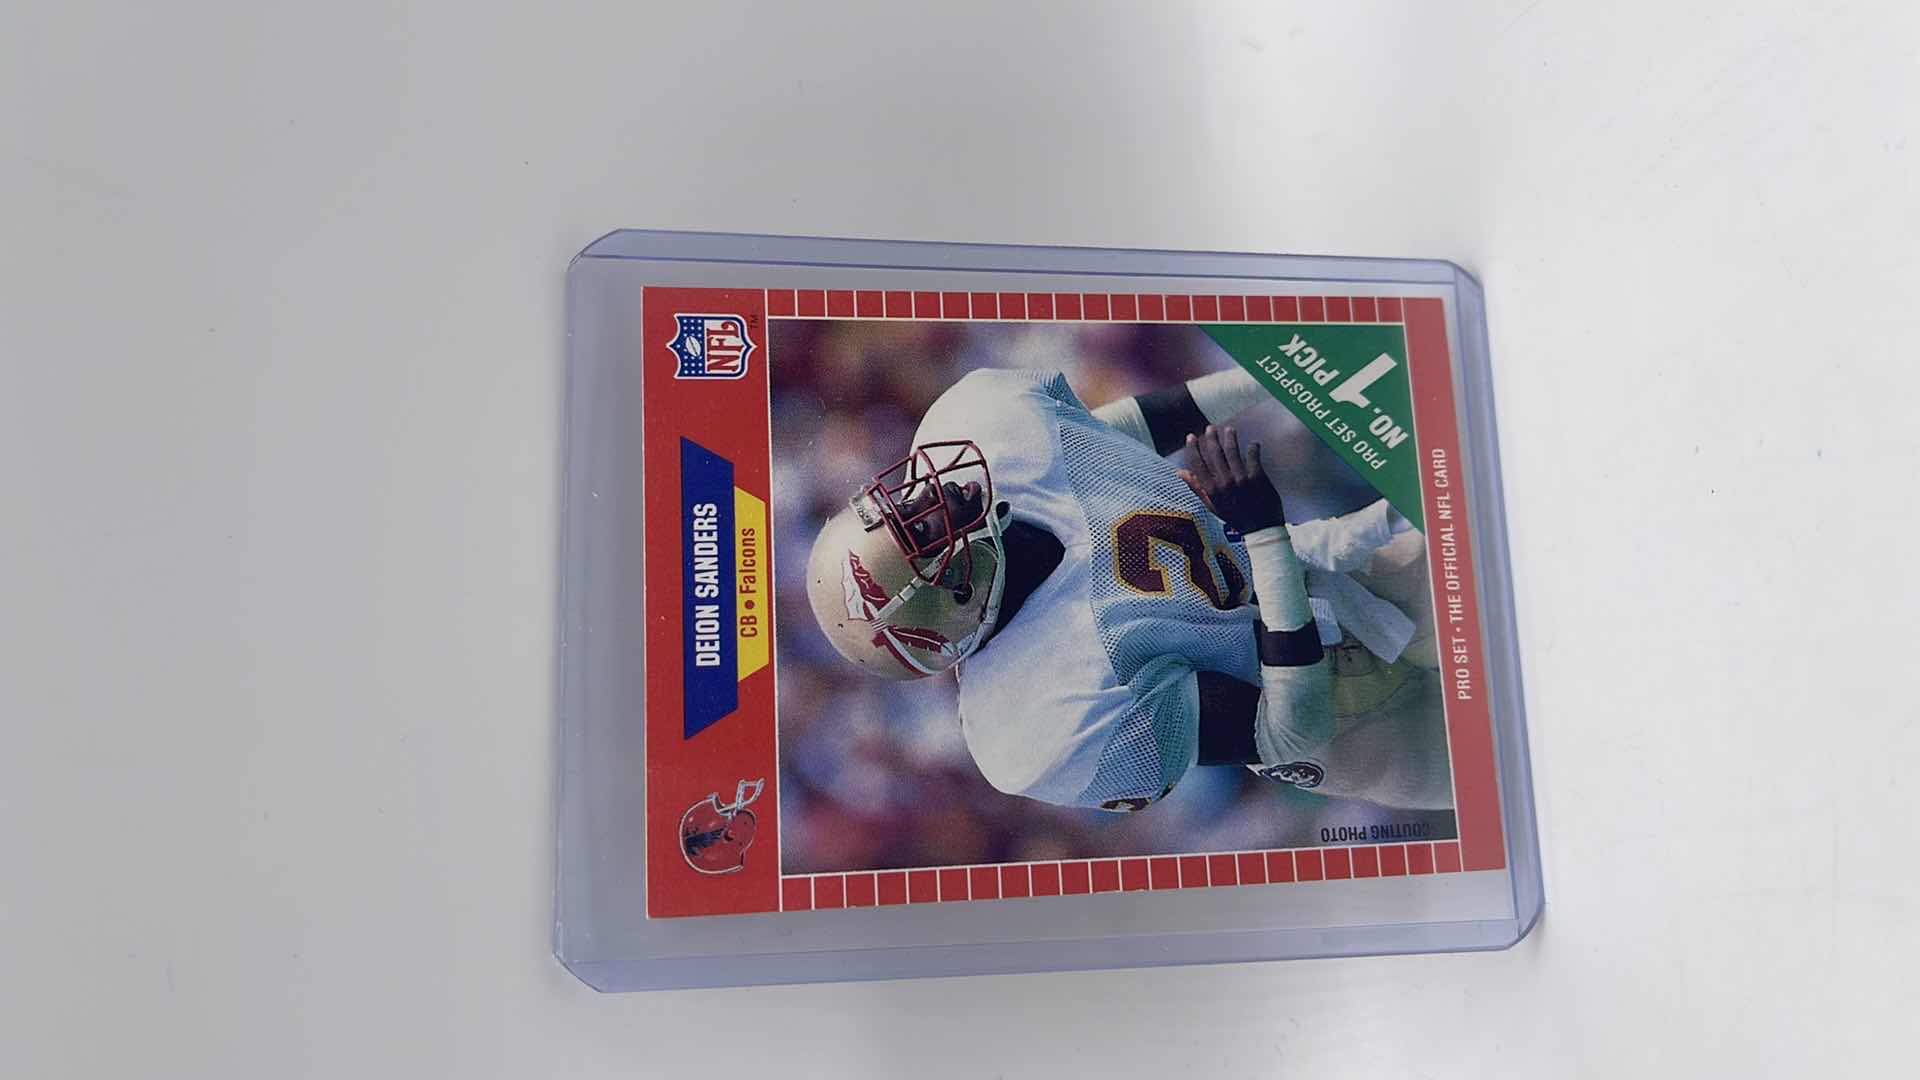 Photo 1 of 1989 DEION SANDERS PRO SET ROOKIE CARD 486 APPROX VALUE $100